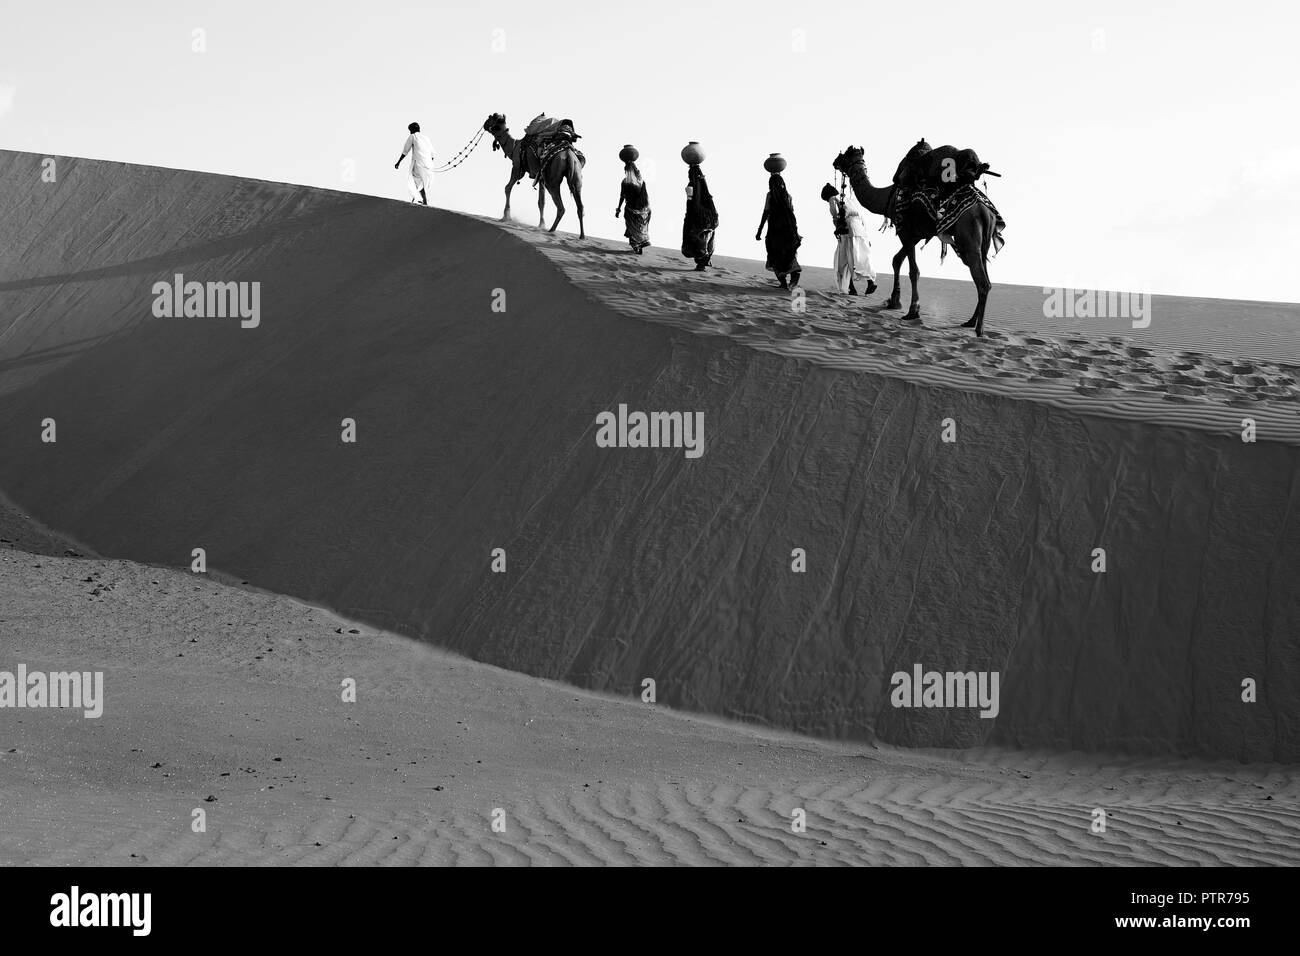 The image of Rajasthani trditional people in sand dunes of  Jaisalmer, Rajasthan, India Stock Photo